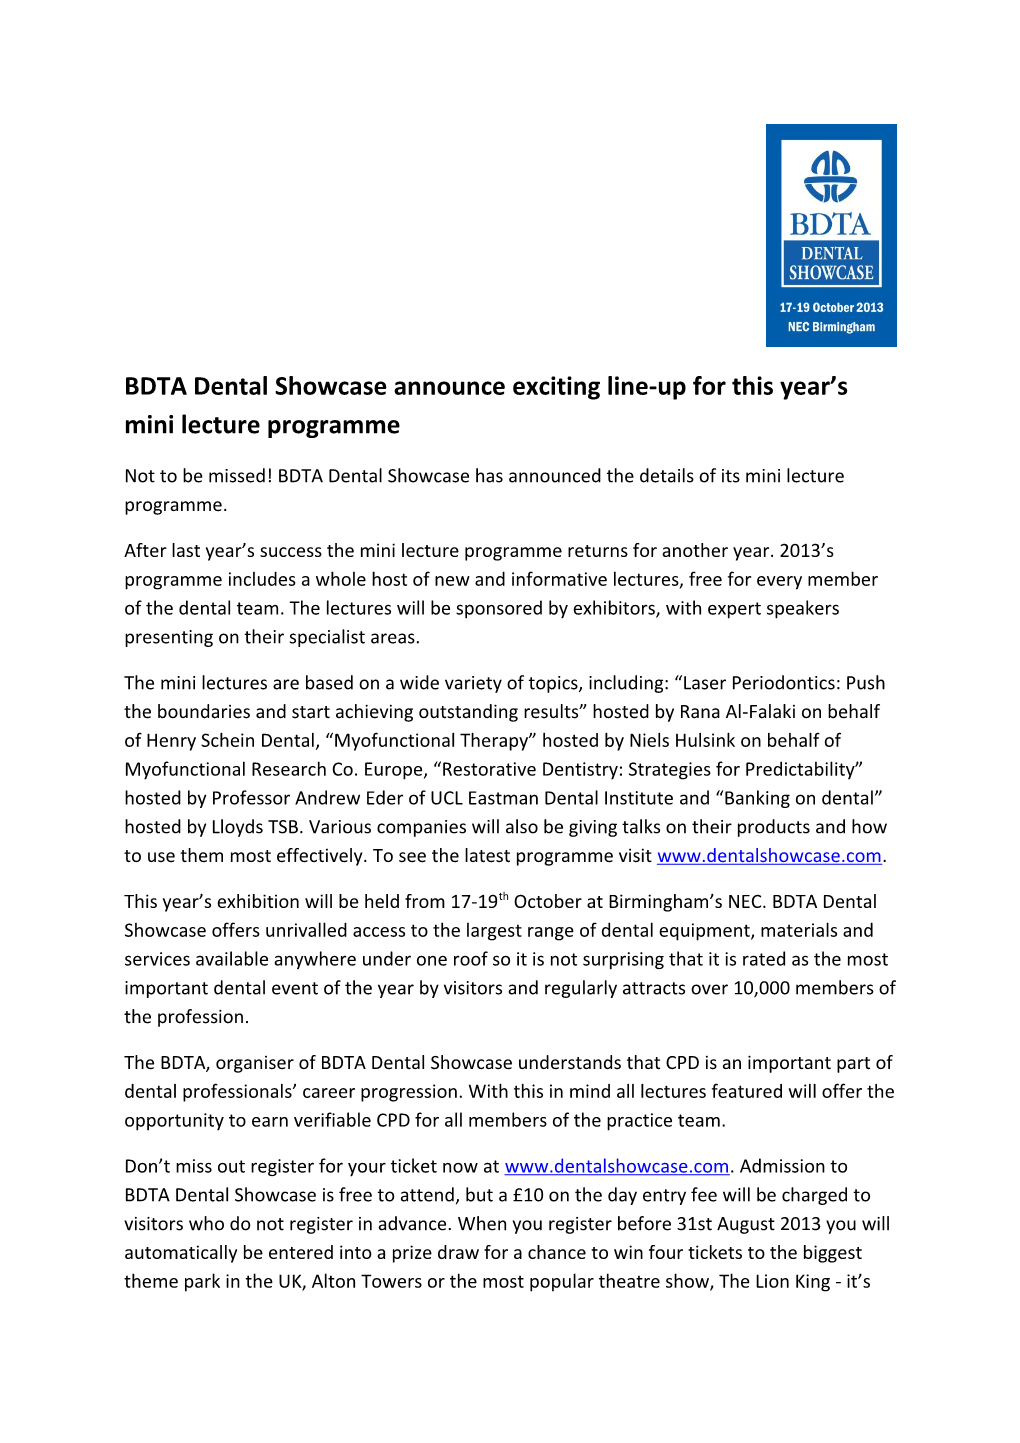 BDTA Dental Showcase Announce Exciting Line-Up for This Year S Mini Lecture Programme